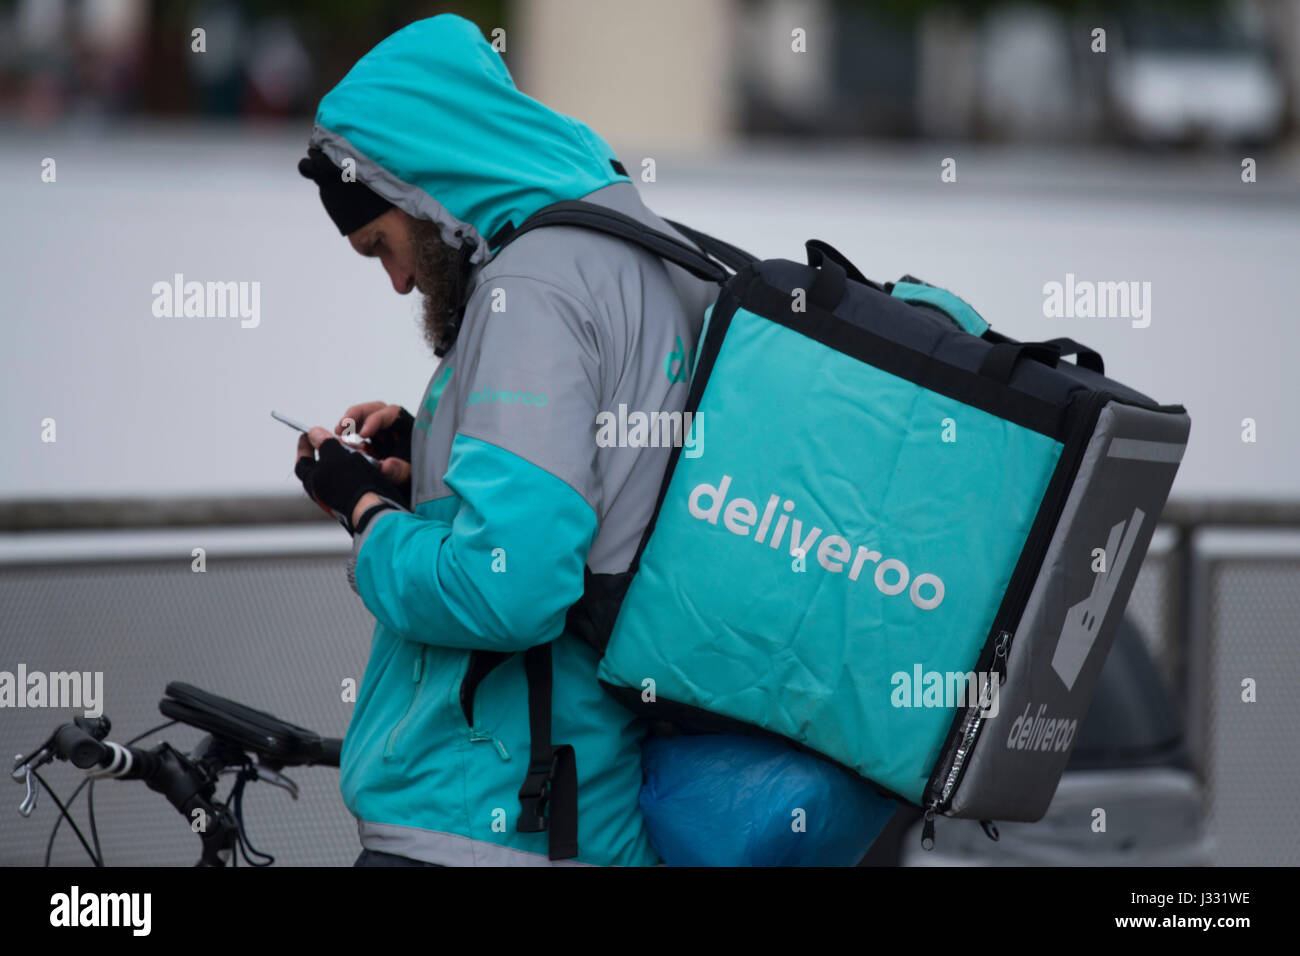 A Deliveroo worker on a bicycle with a Delivroo branded rucksack carrying takeaway food. Stock Photo